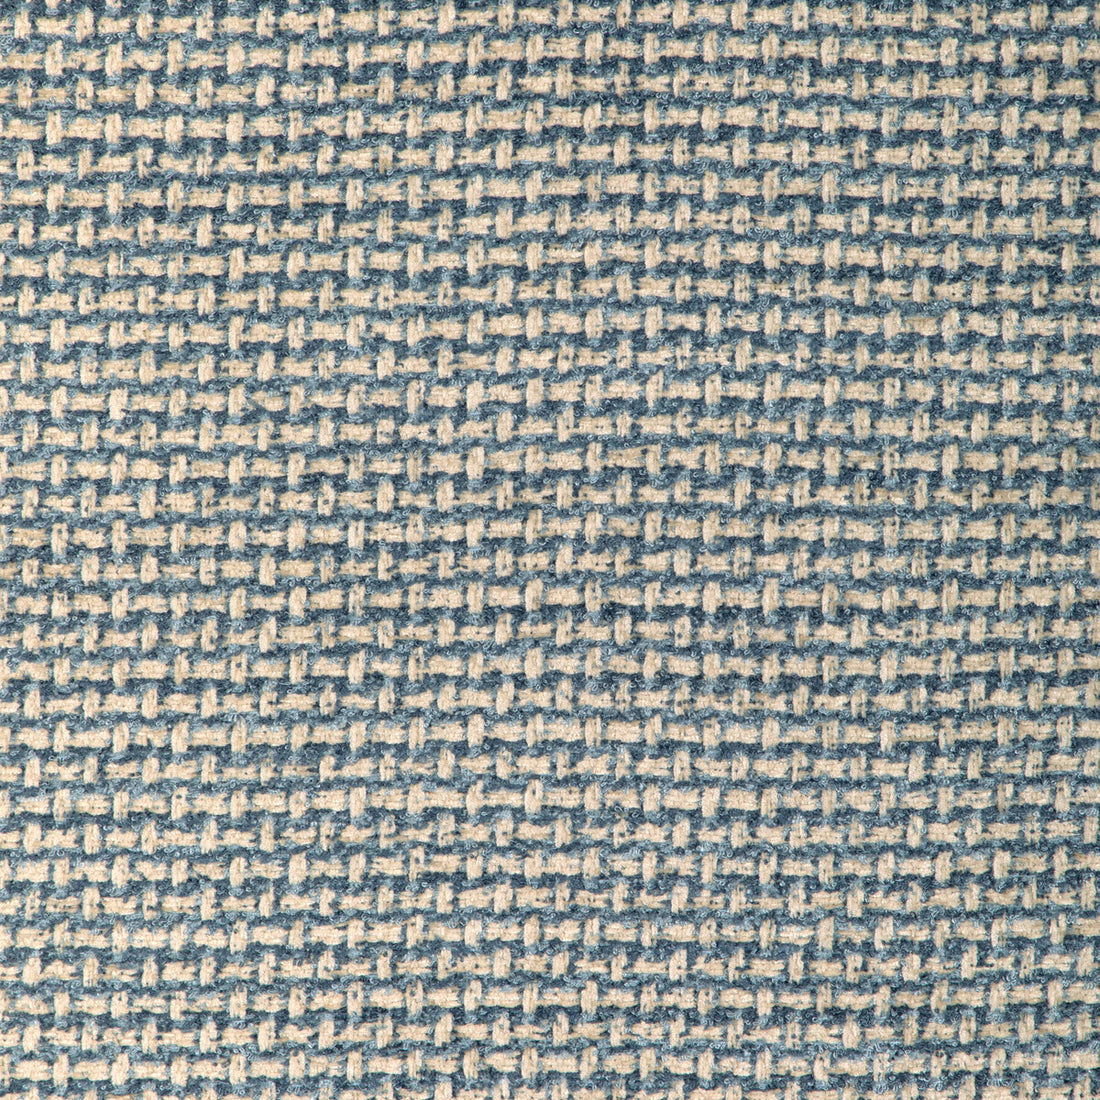 Nivolet Texture fabric in blue color - pattern 8023154.516.0 - by Brunschwig &amp; Fils in the Chambery Textures IV collection